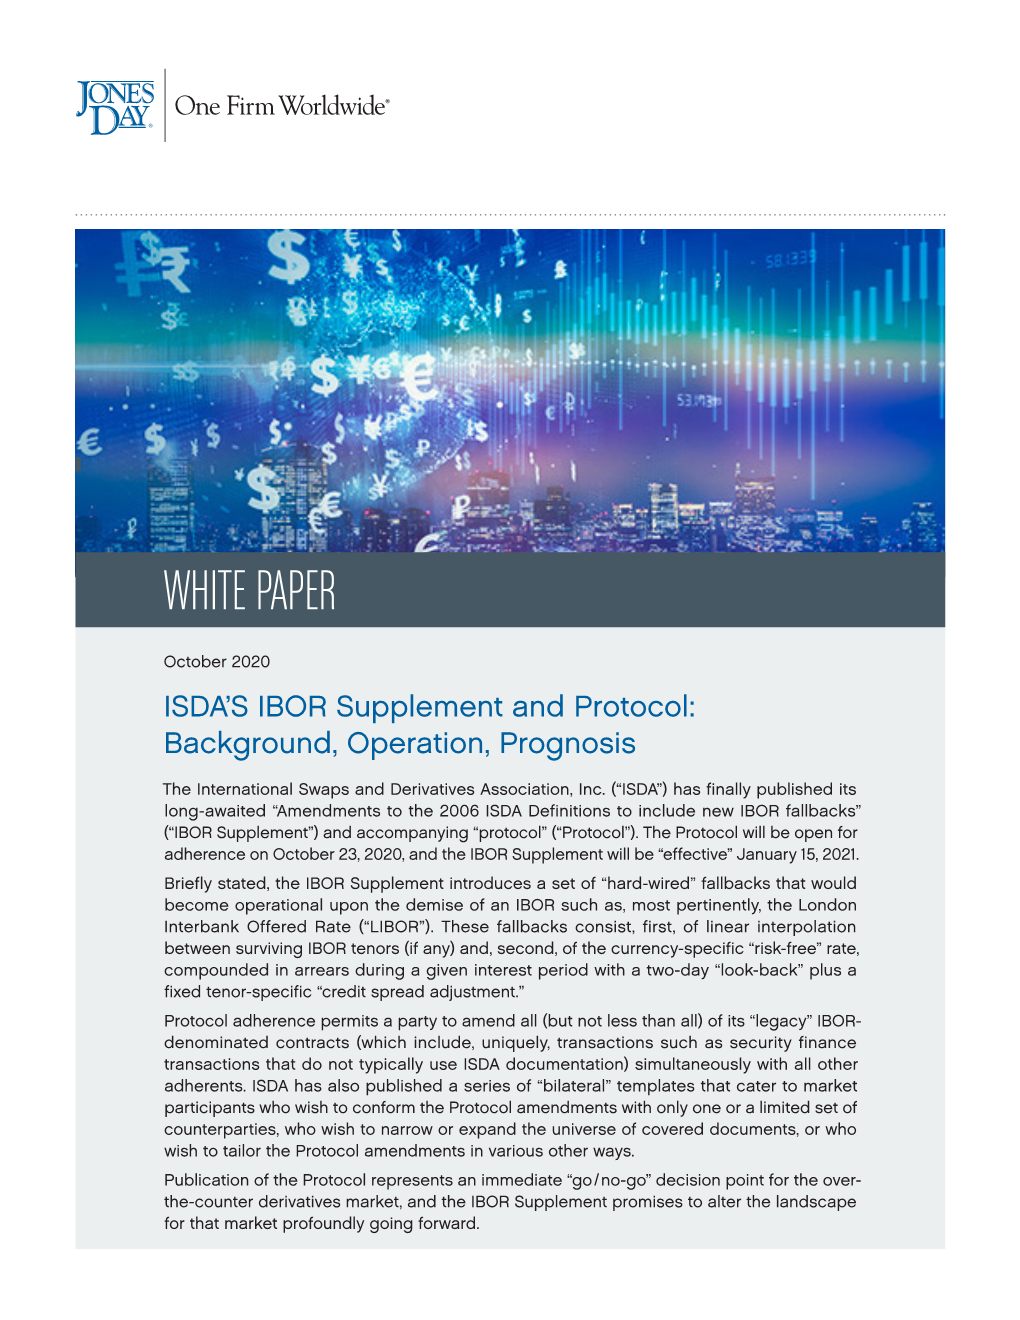 ISDA's IBOR Supplement and Protocol